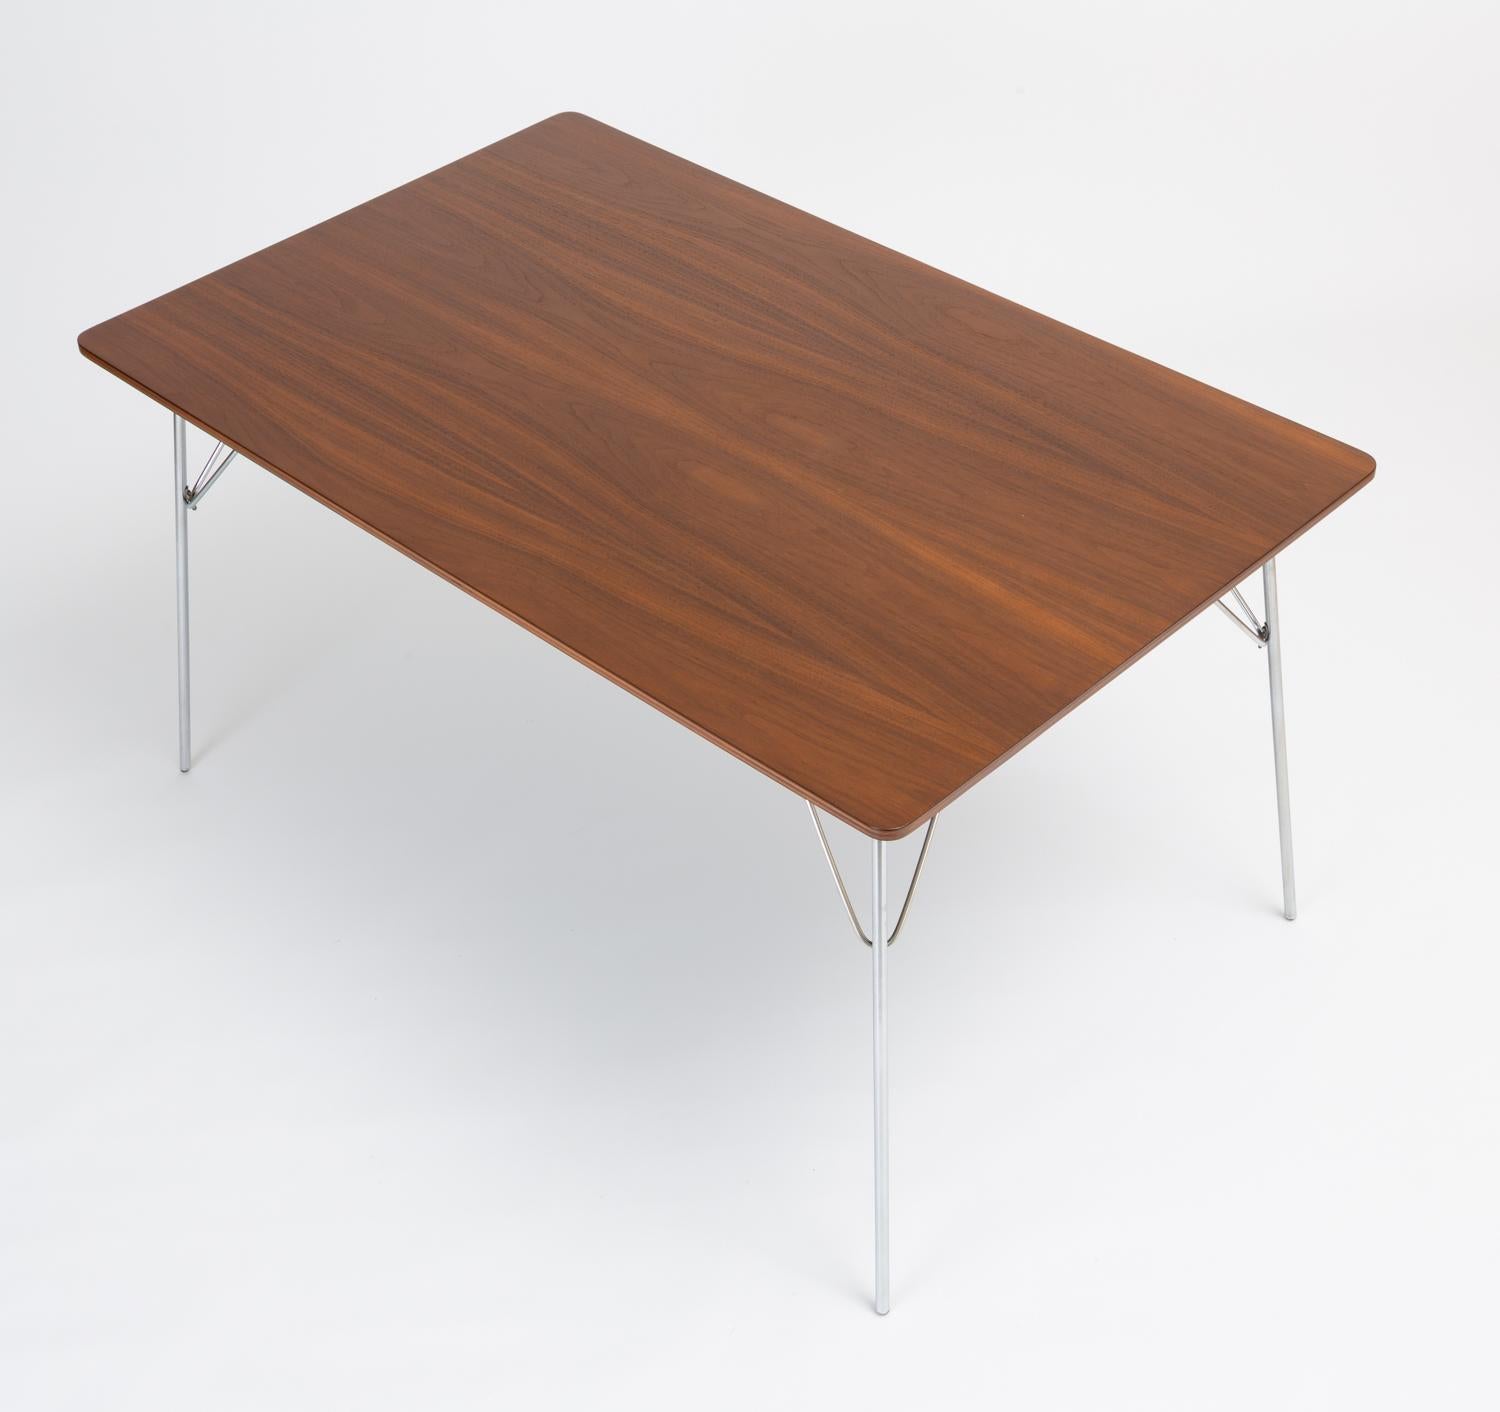 A rectangular dining table with walnut veneered surface and folding metal legs, designed by Ray and Charles Eames and produced by Herman Miller. Dubbed the DTM-10 (“Dining Table Metal”), this example was part of a series of tables introduced in 1947